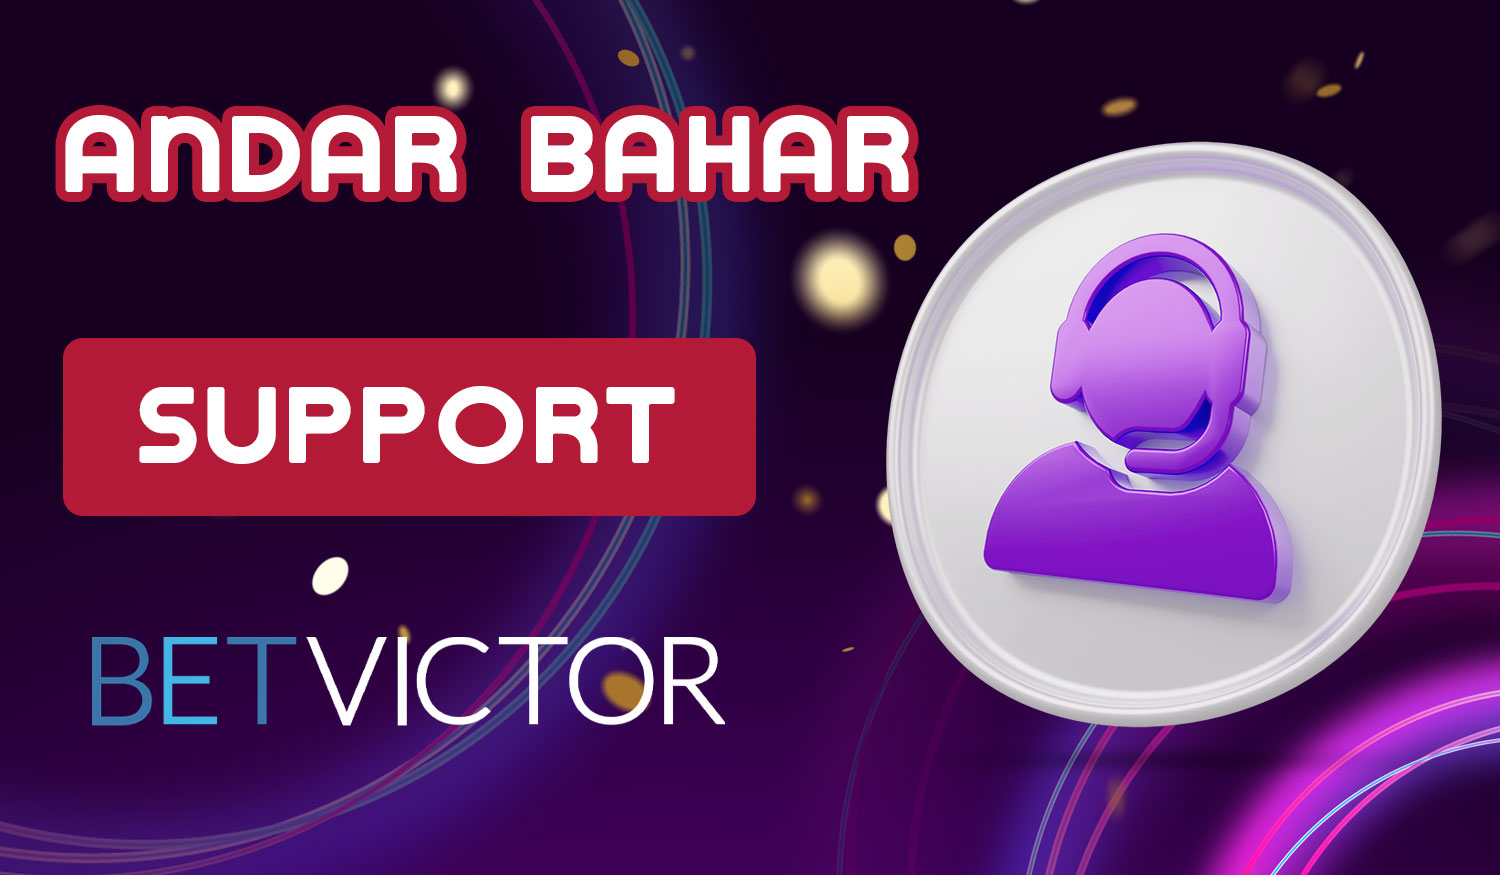 BetVictor India provides full player support 24/7